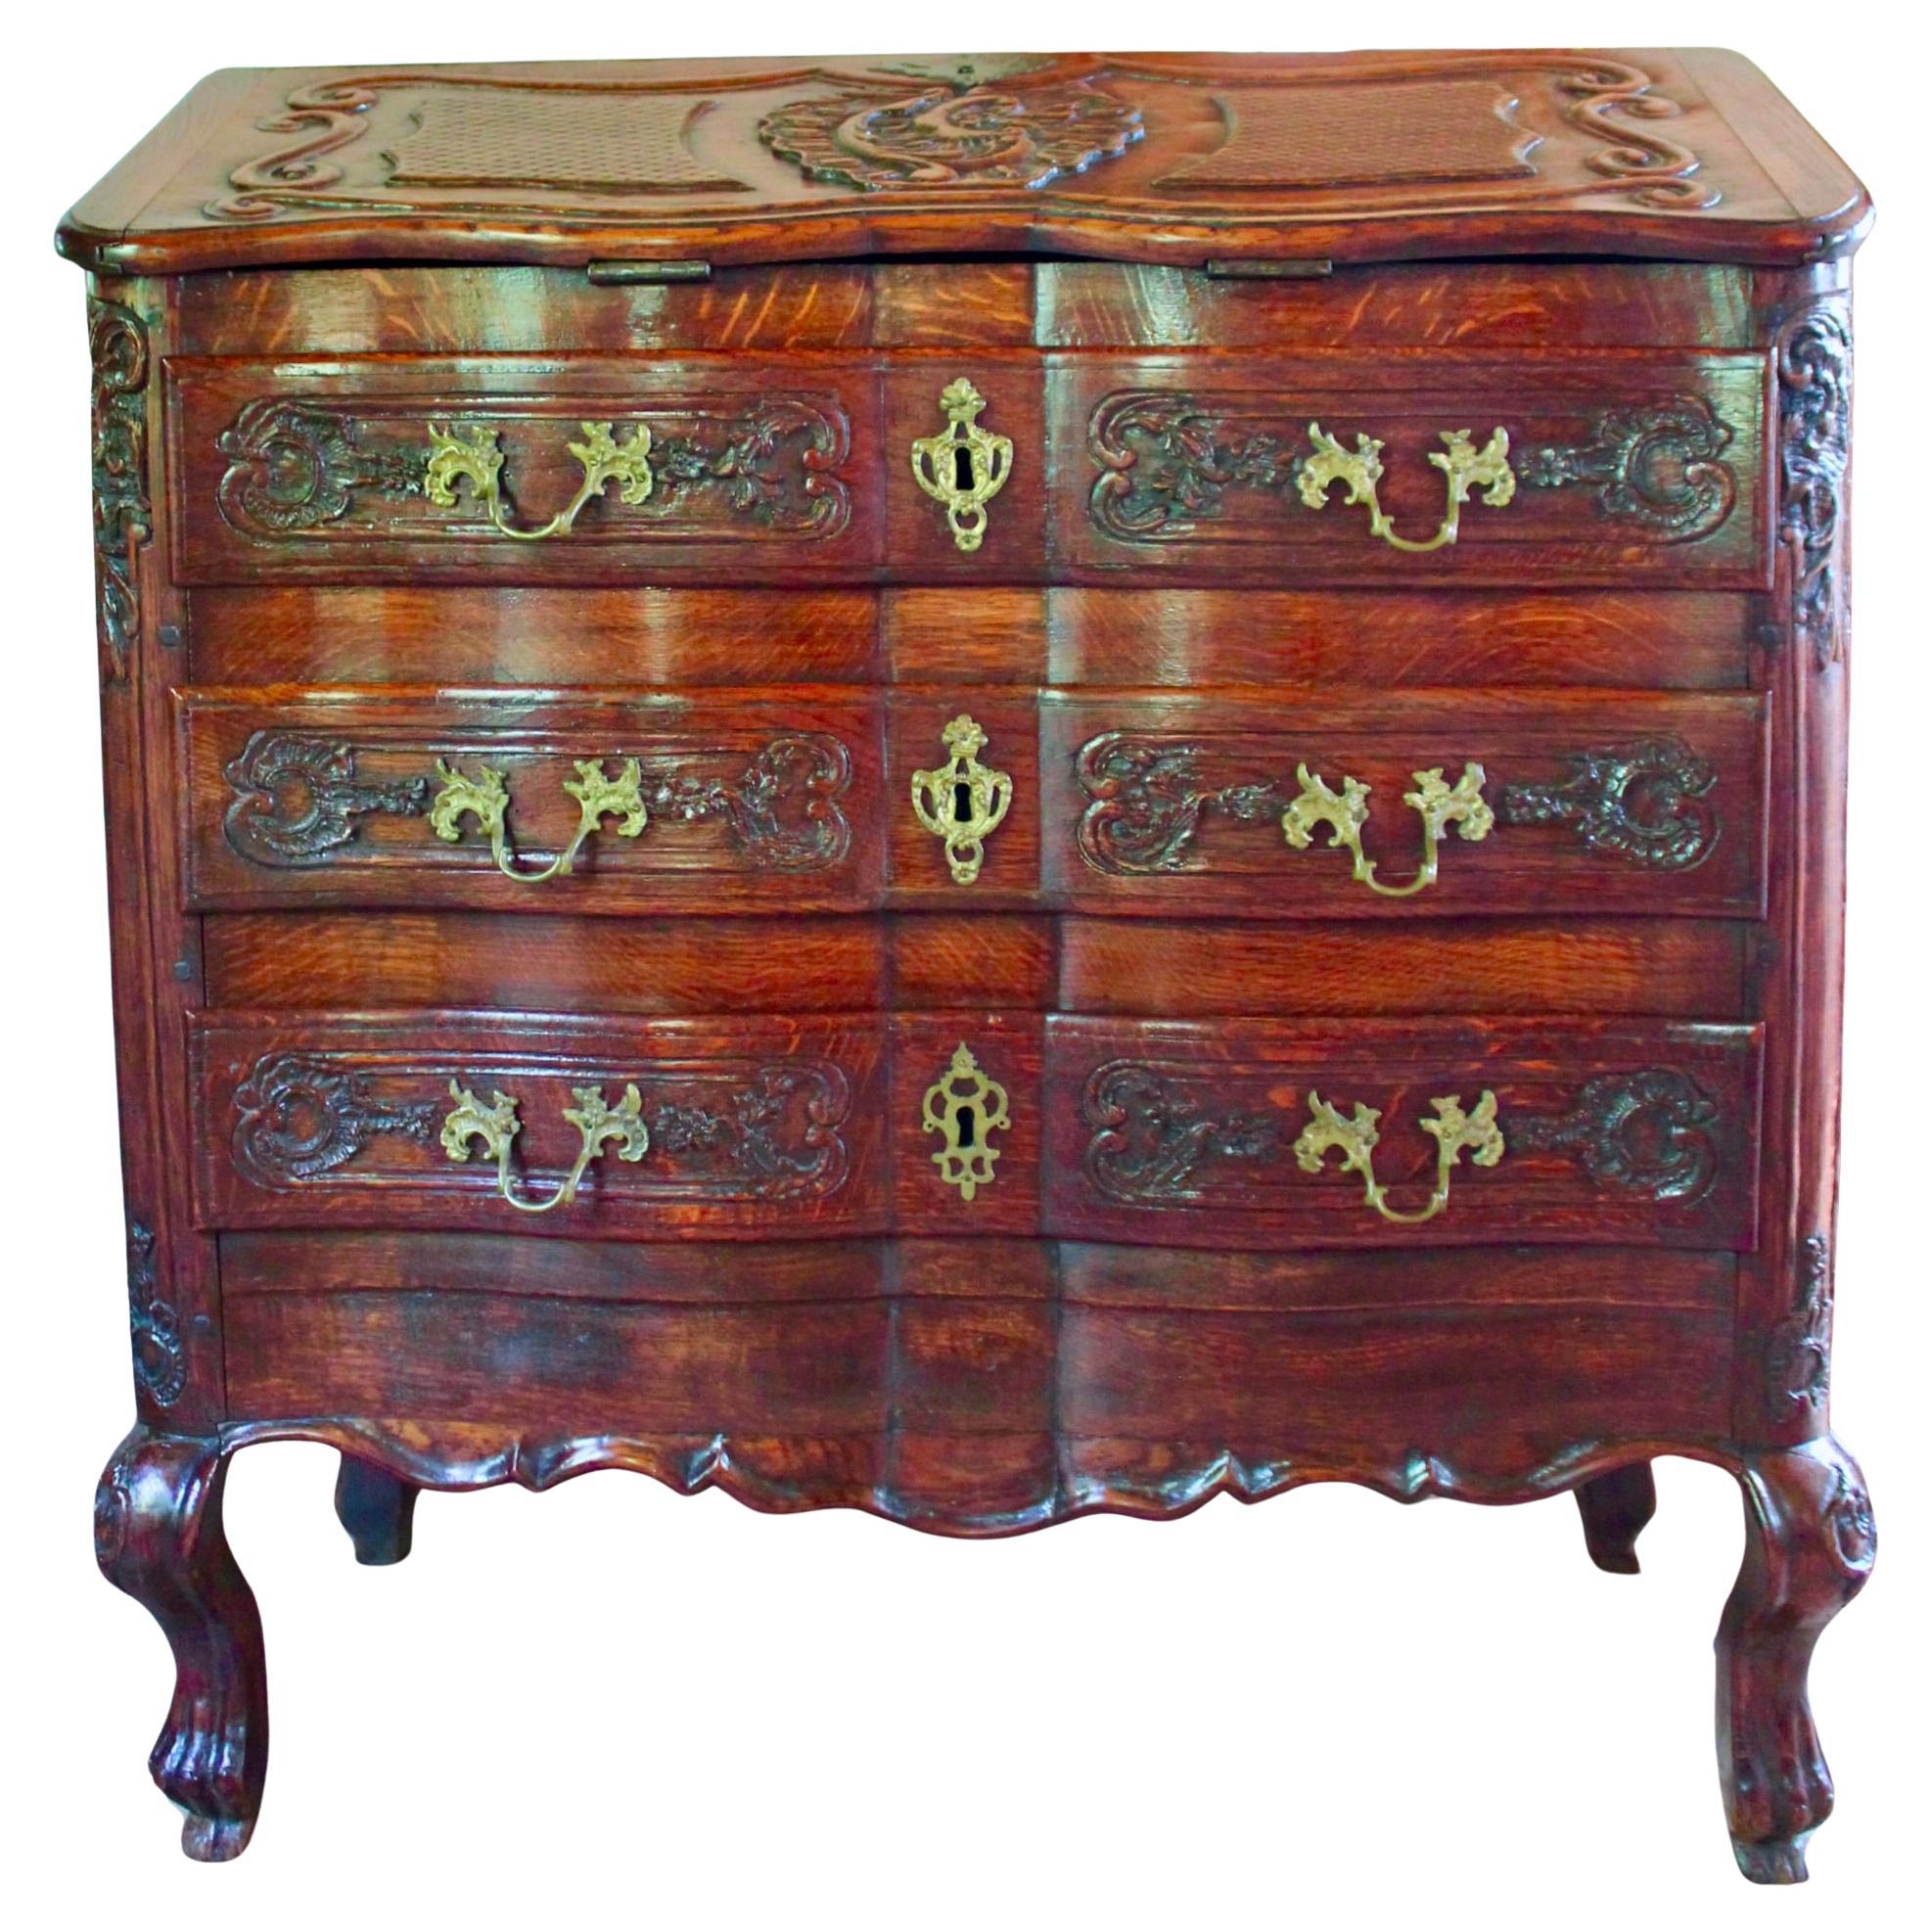 An exuberantly carved antique Northern European desk (probably Dutch) of unusual form: a serpentine block front case piece with three drawers and a slightly sloped fall front lid above, designed to be supported by the drawer below. The carving is